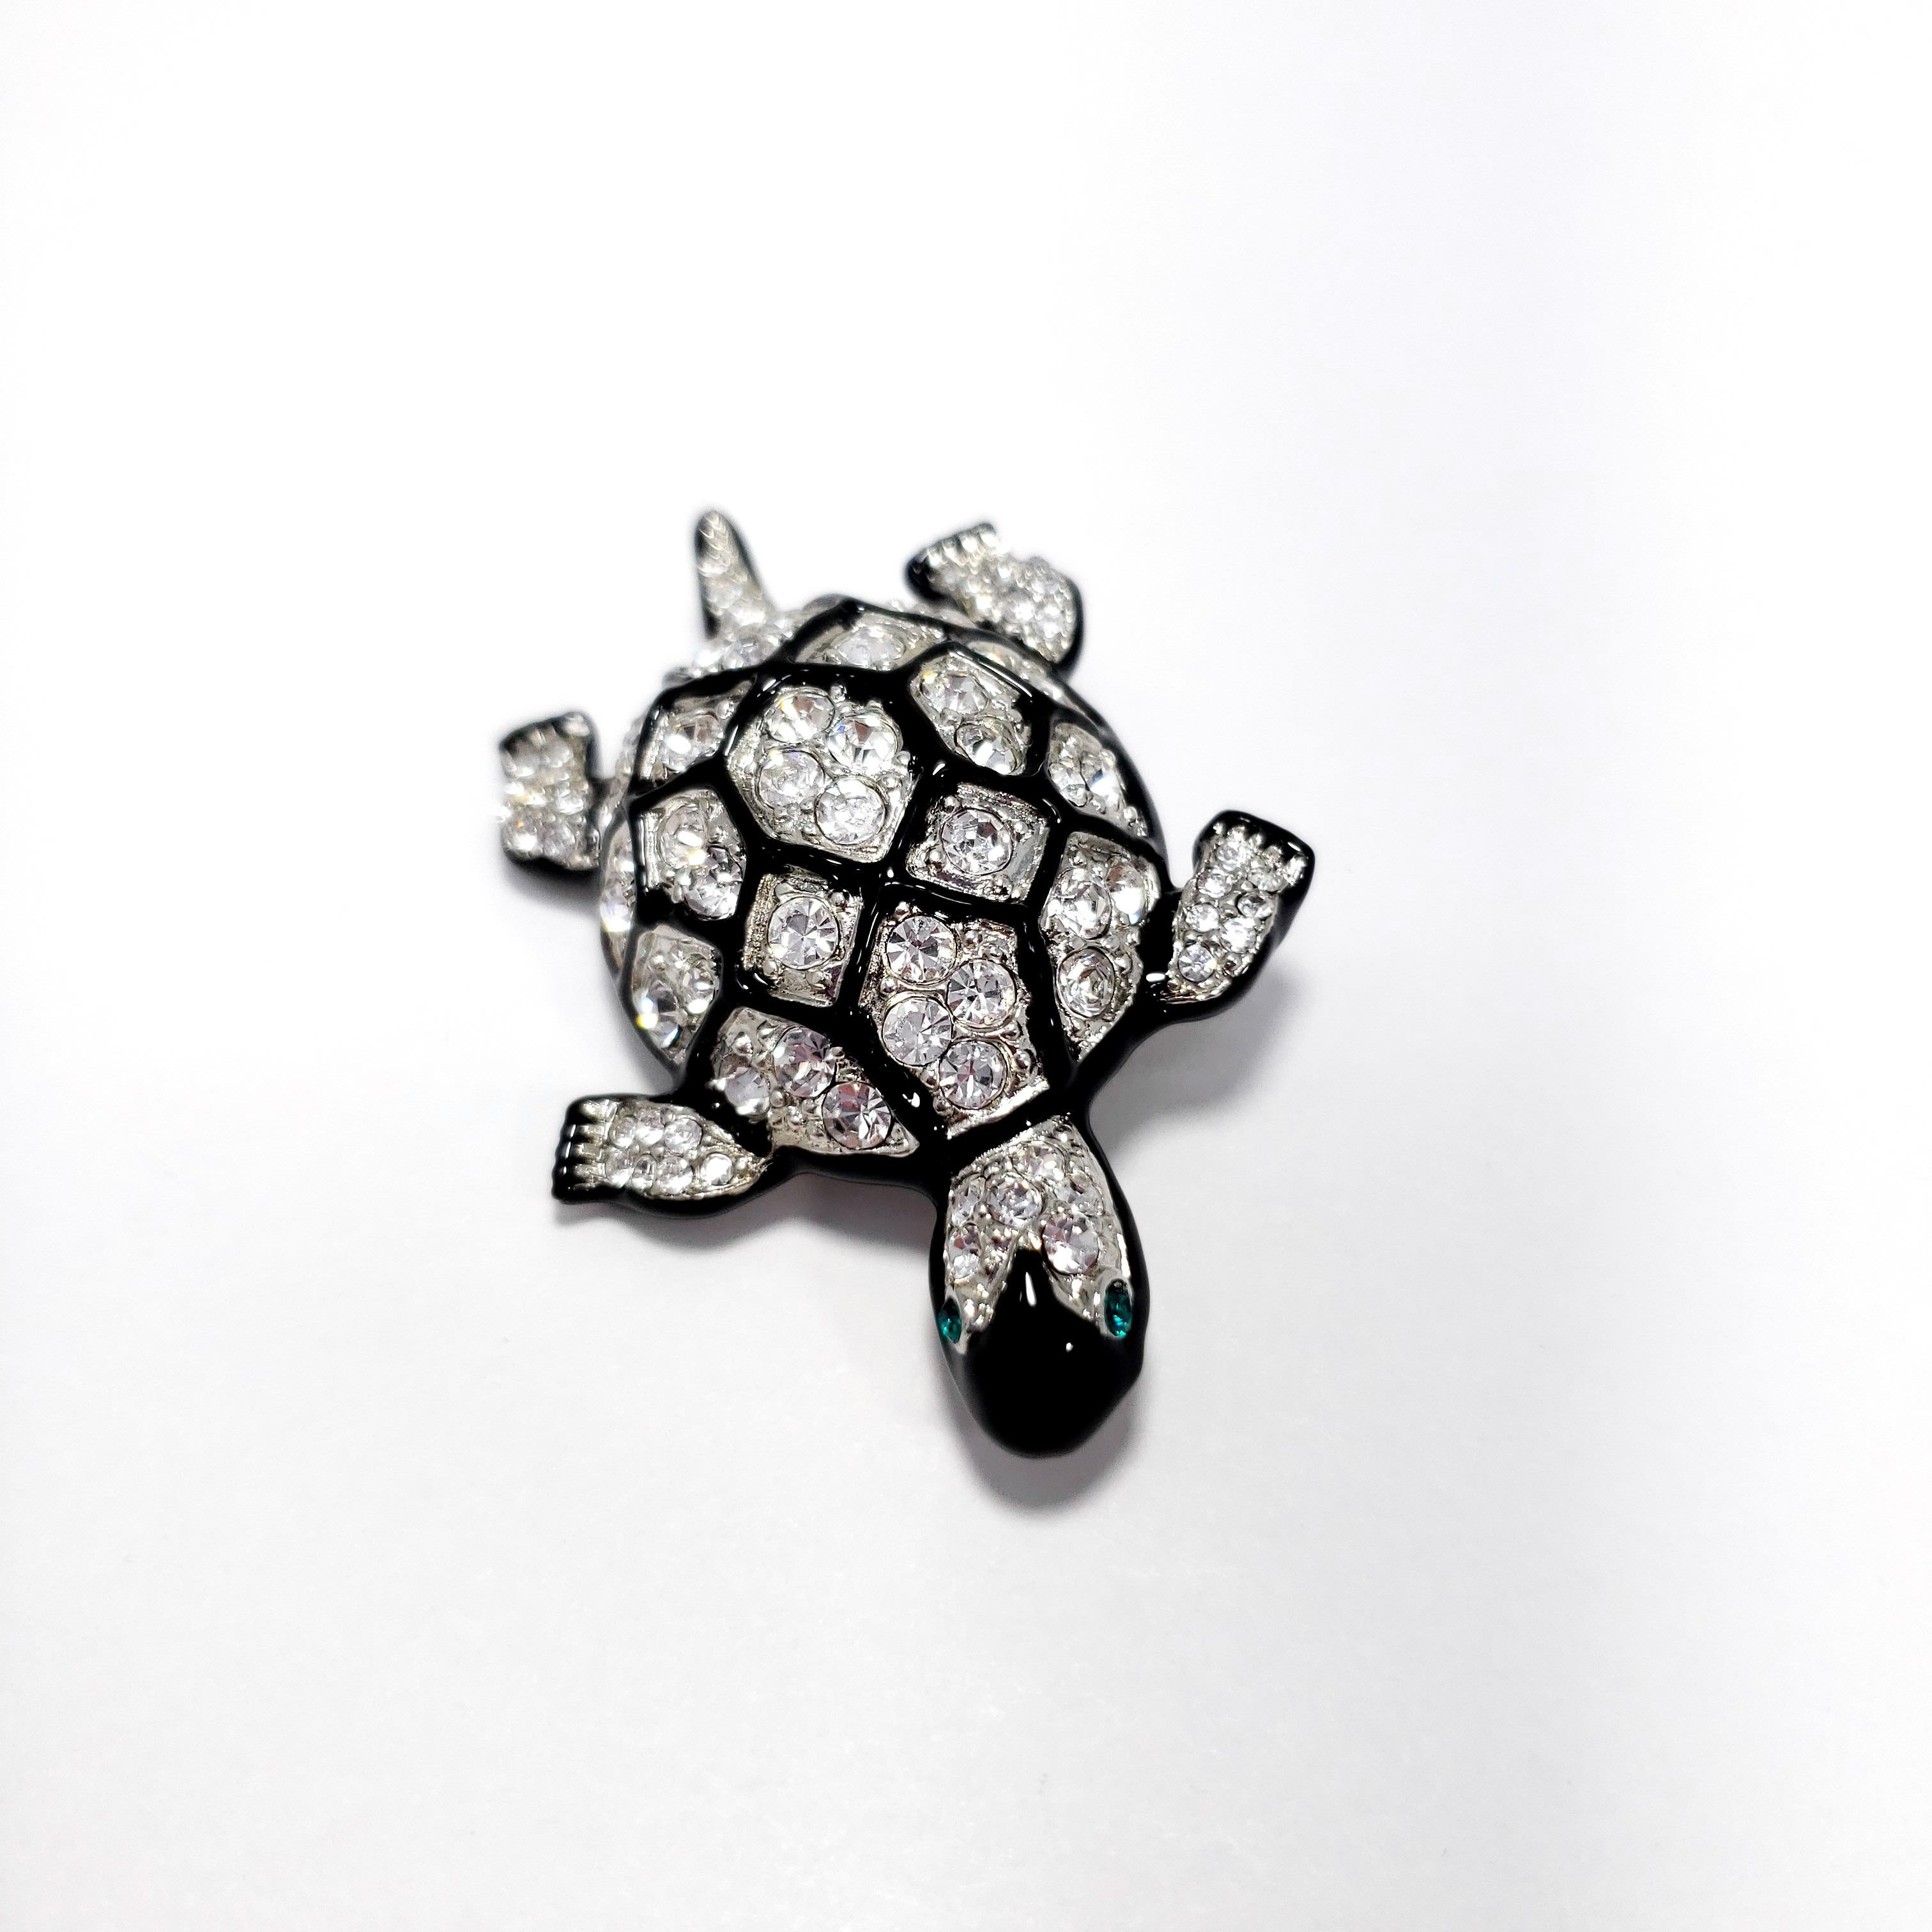 A brooch by Kenneth Jay Lane. This sparkling turtle features clear pave crystals, accented with black enamel outlines on the shell.

Hallmarks: Kenneth Lane, Made in USA